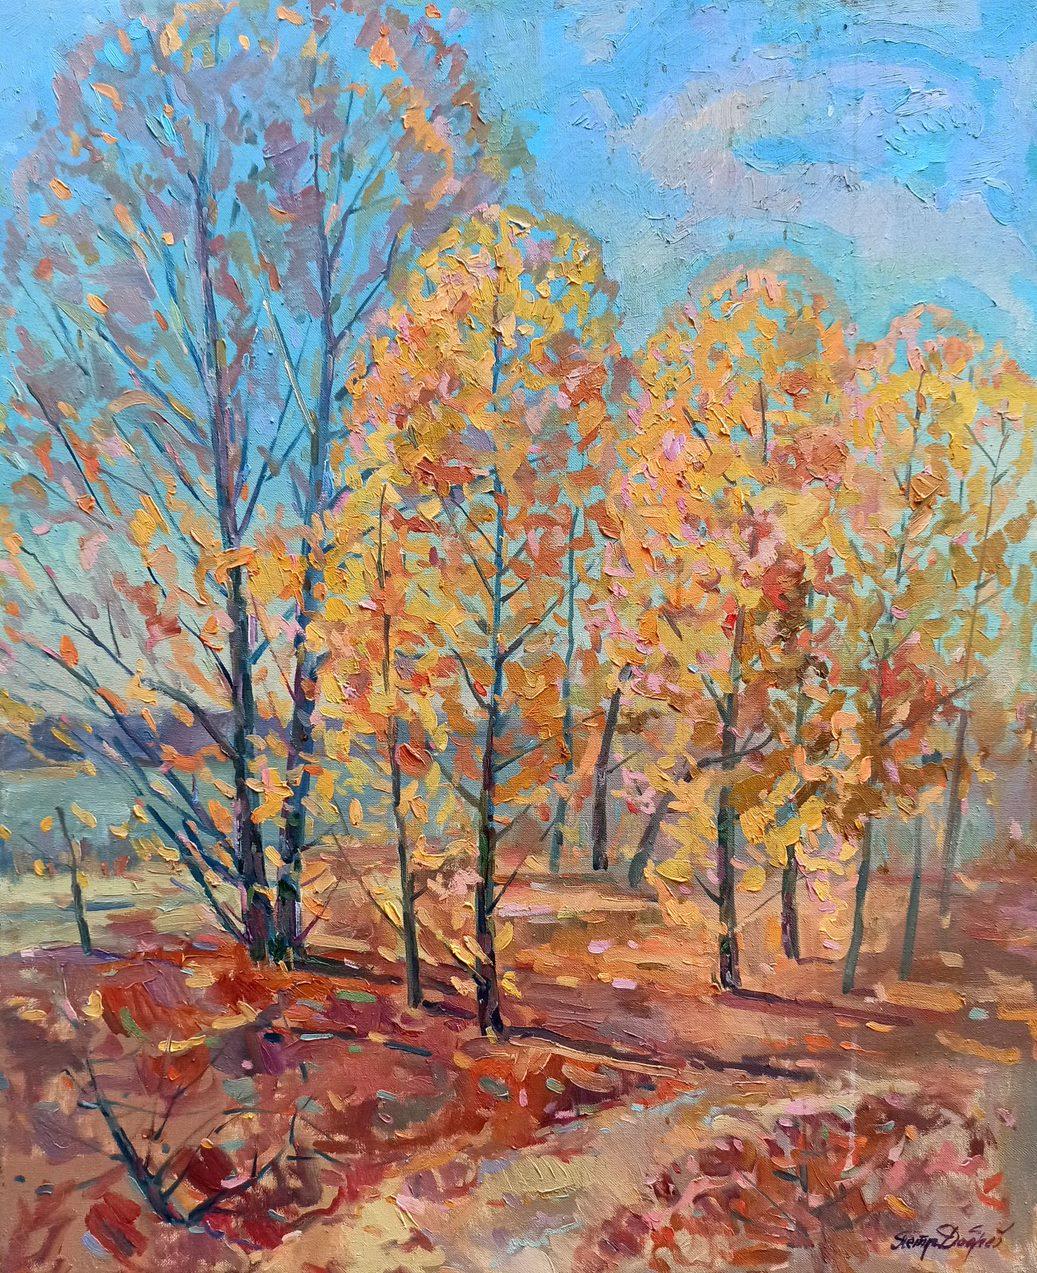 Peter Tovpev Landscape Painting - Autumn Sunny Day, Landscape, Original oil Painting, Ready to Hang